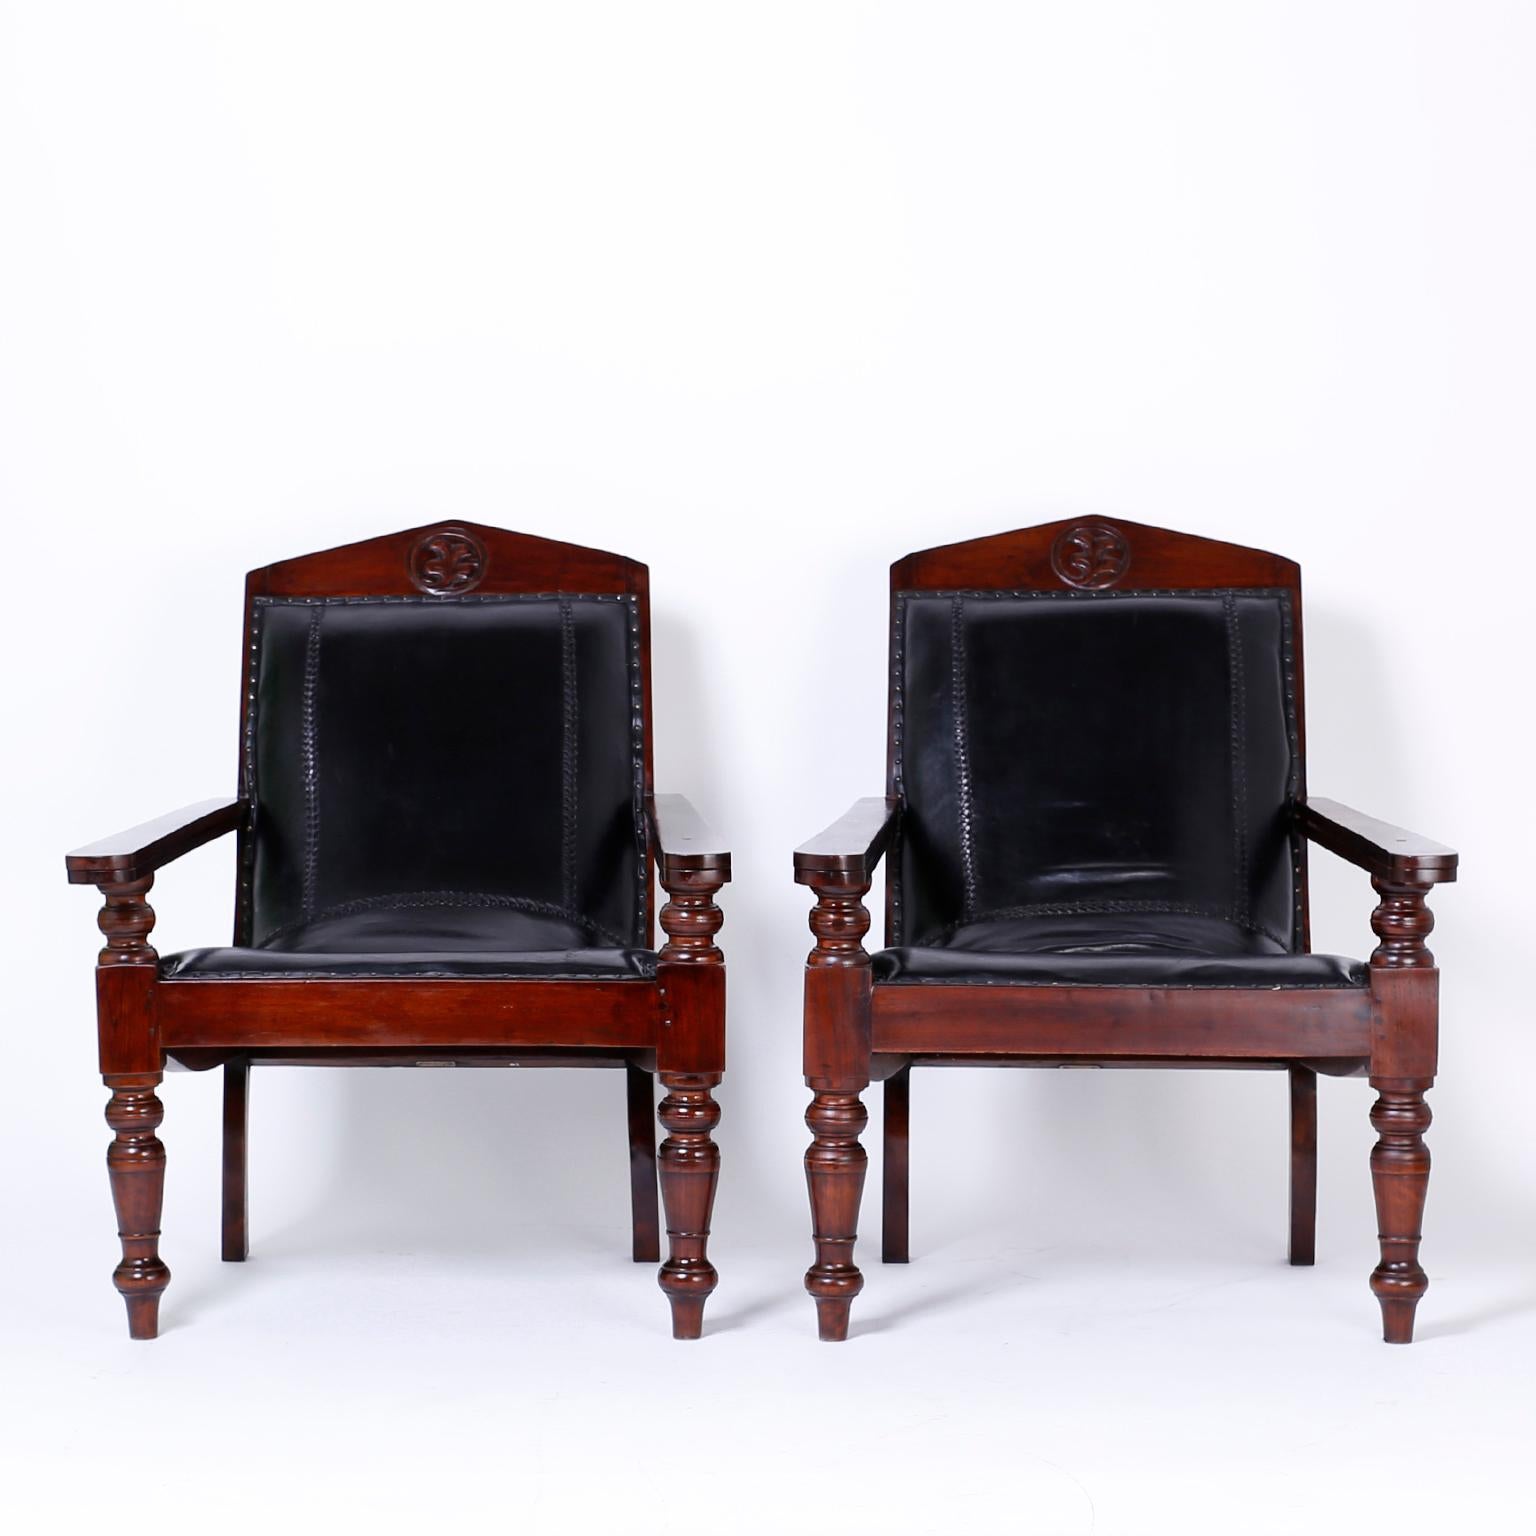 Pair of antique British Colonial mahogany plantation chairs upholstered in hand tooled black leather. The classic frames have a carved leaf on the crest, an elegant comfortable form, handmade pegged construction and fold out boot extensions. West